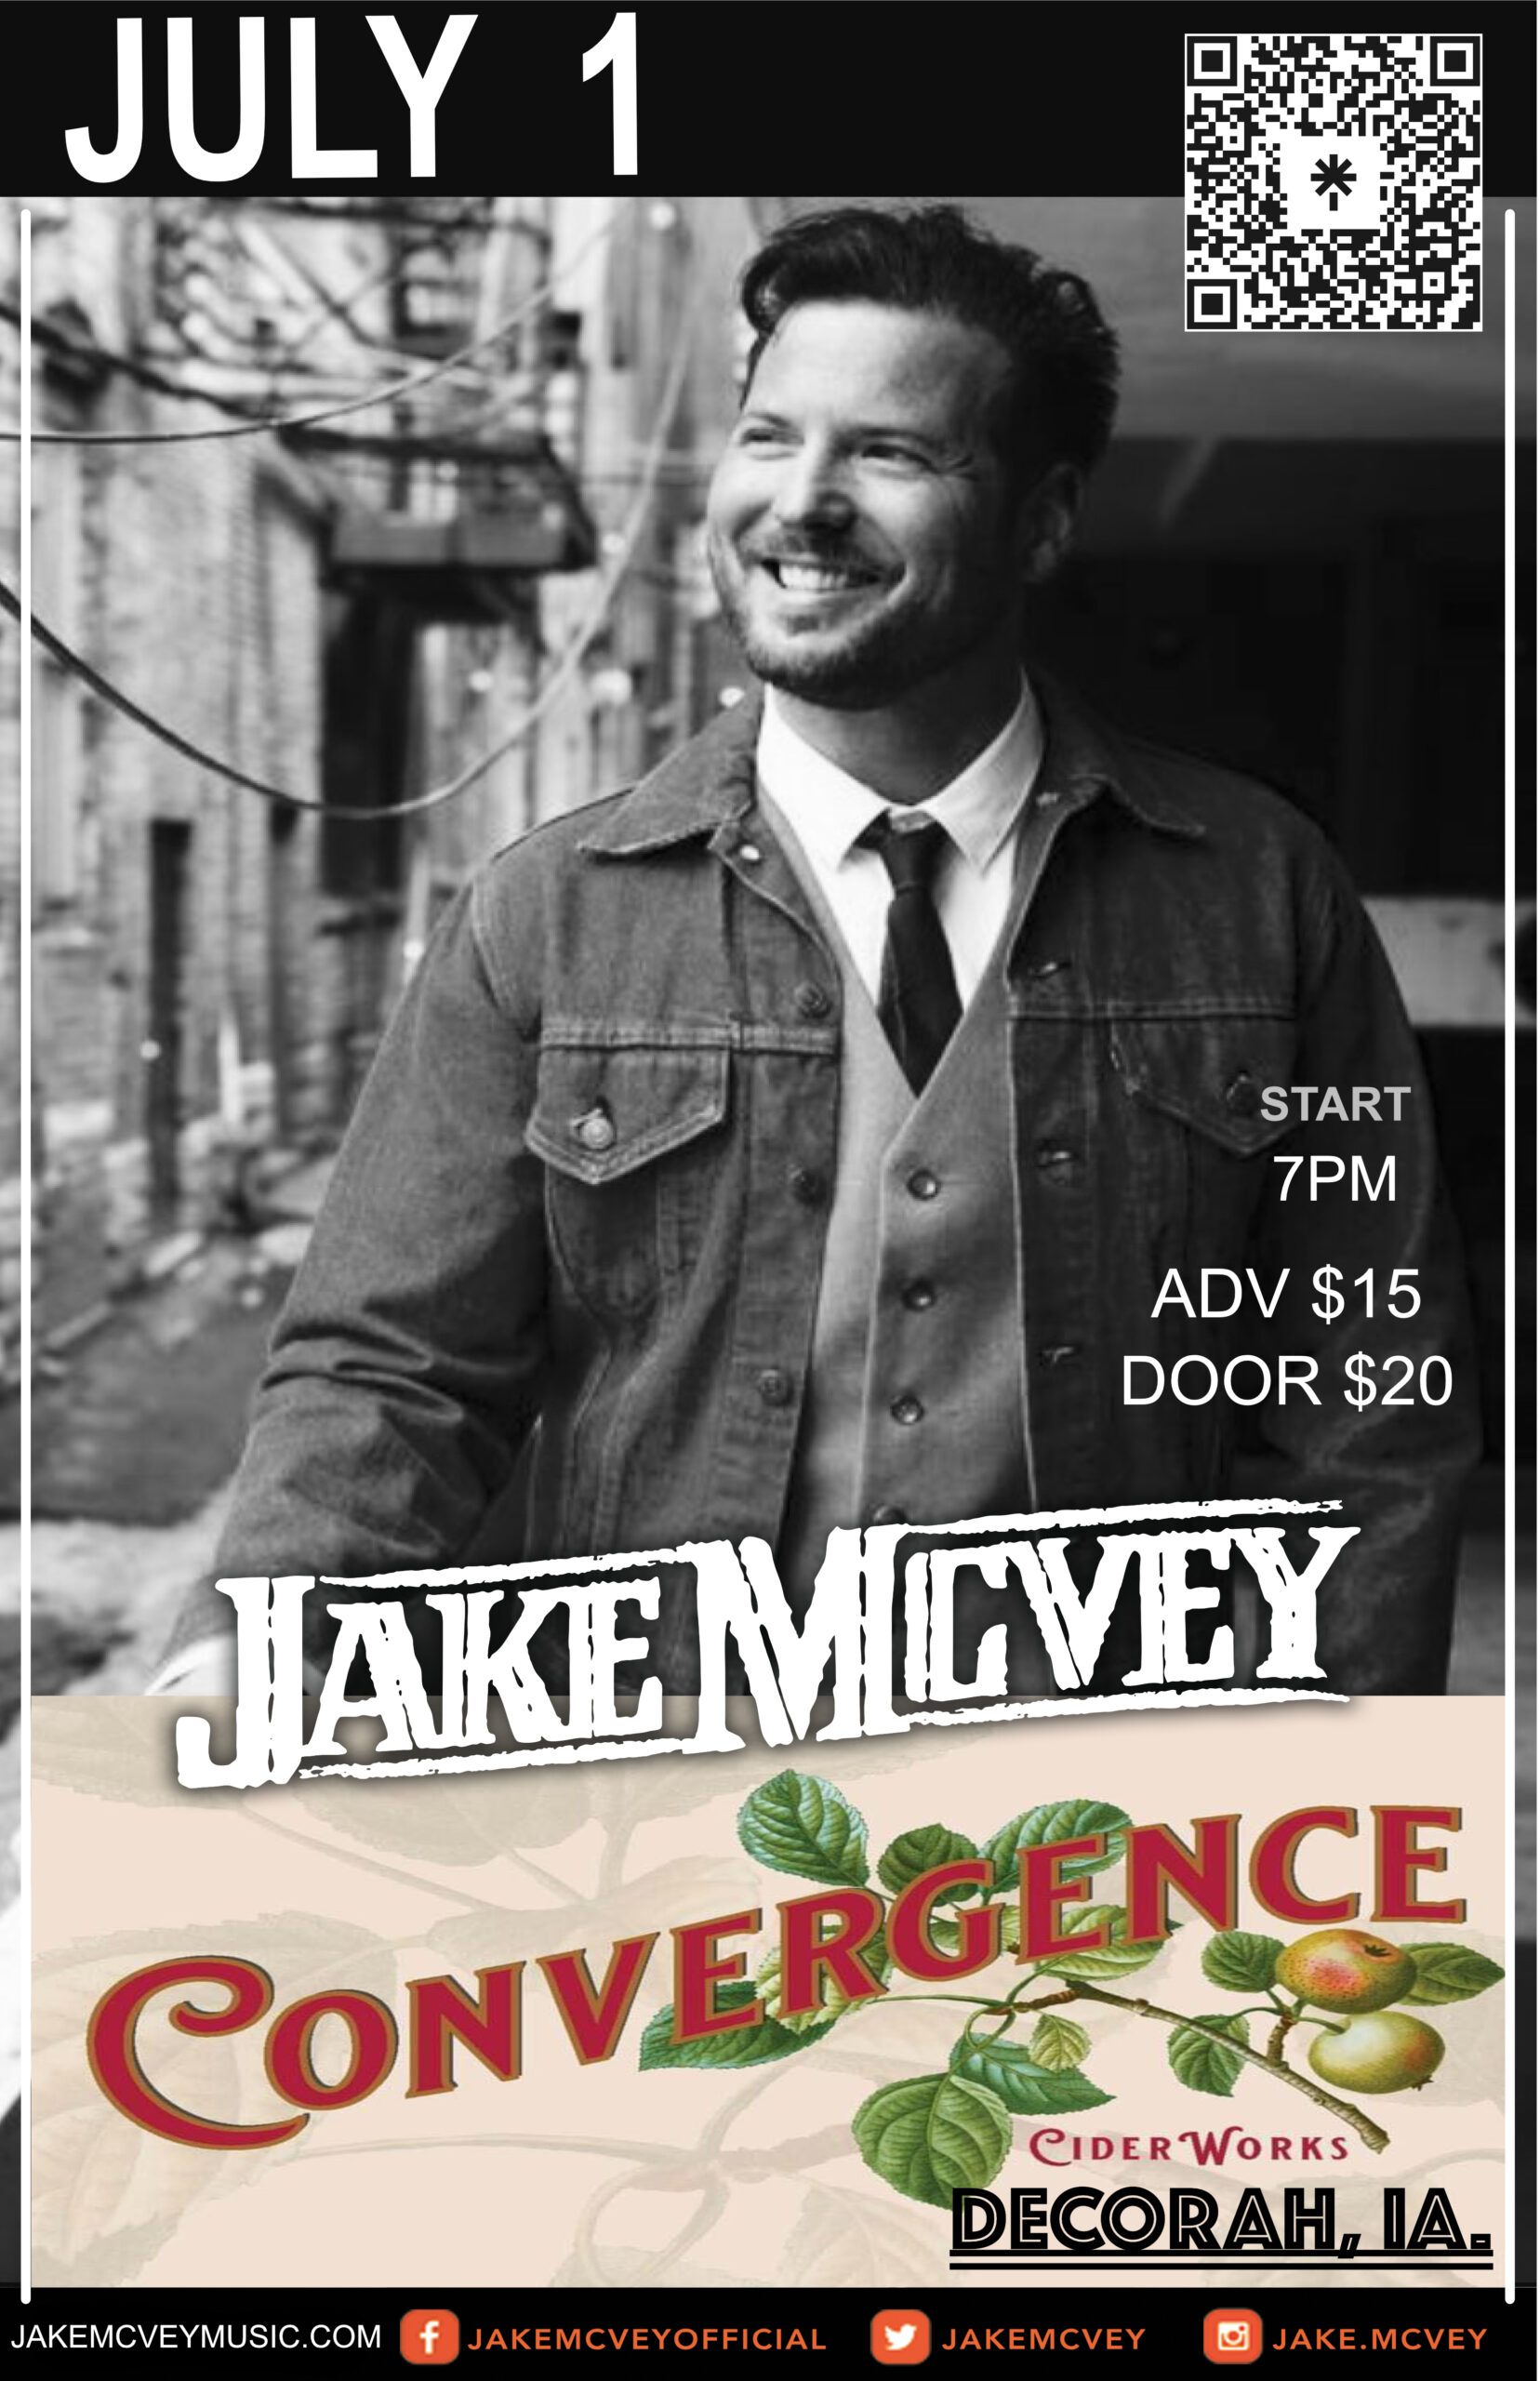 CMA Jake McVey in Concert at Convergence CiderWorks thumbnail